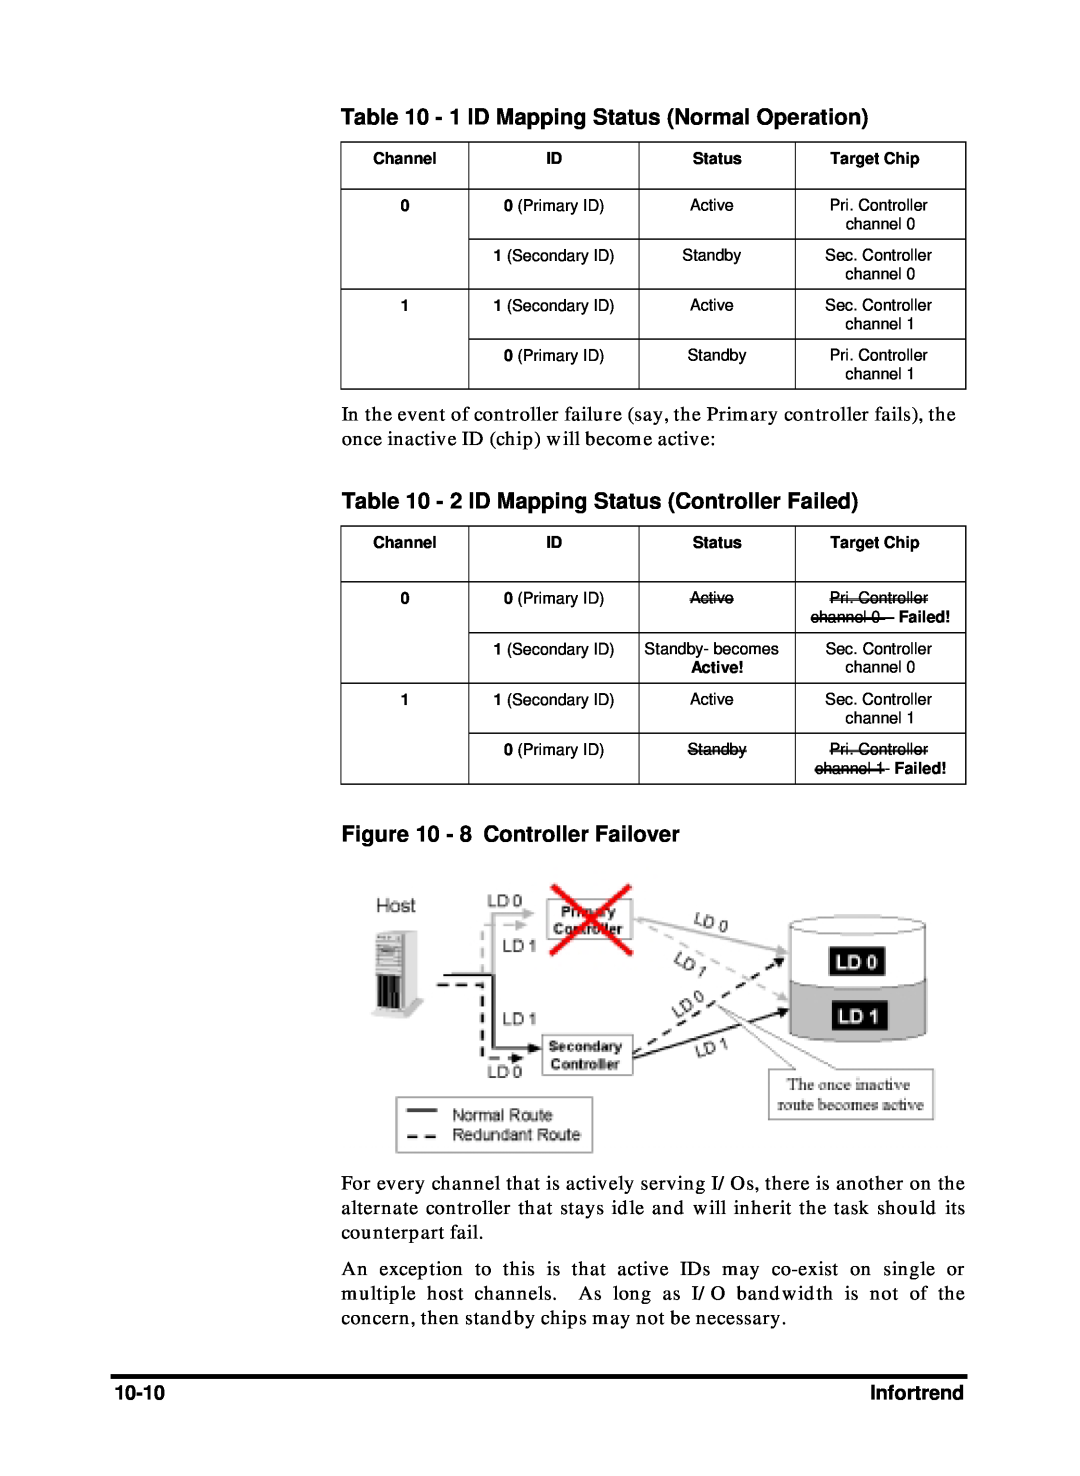 Compaq Infortrend manual 1 ID Mapping Status Normal Operation, 2 ID Mapping Status Controller Failed, 8 Controller Failover 